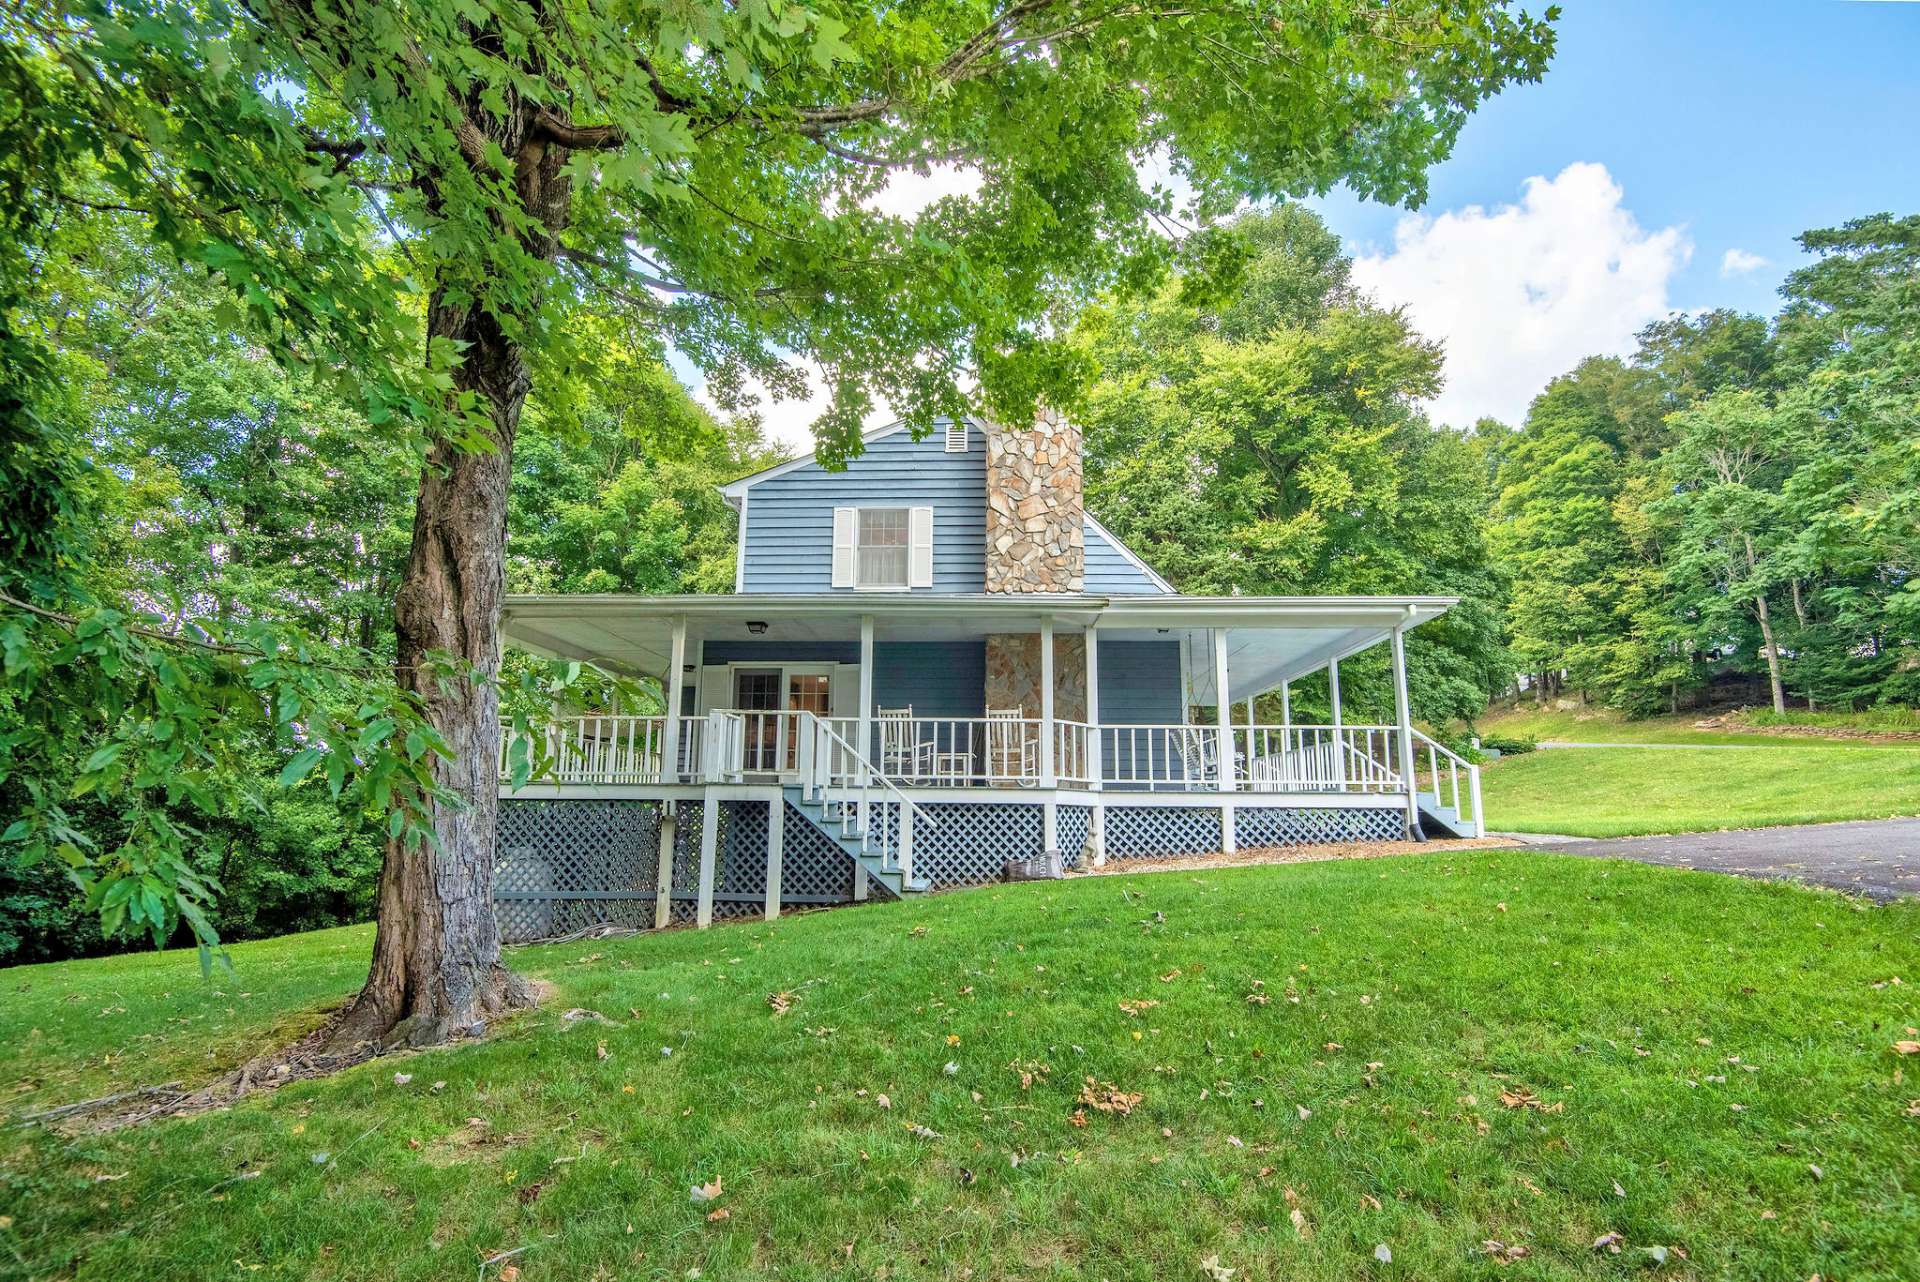 Call today for more information or an appointment to view this sweet 3-bedroom, 2-bath NC Mountain home.